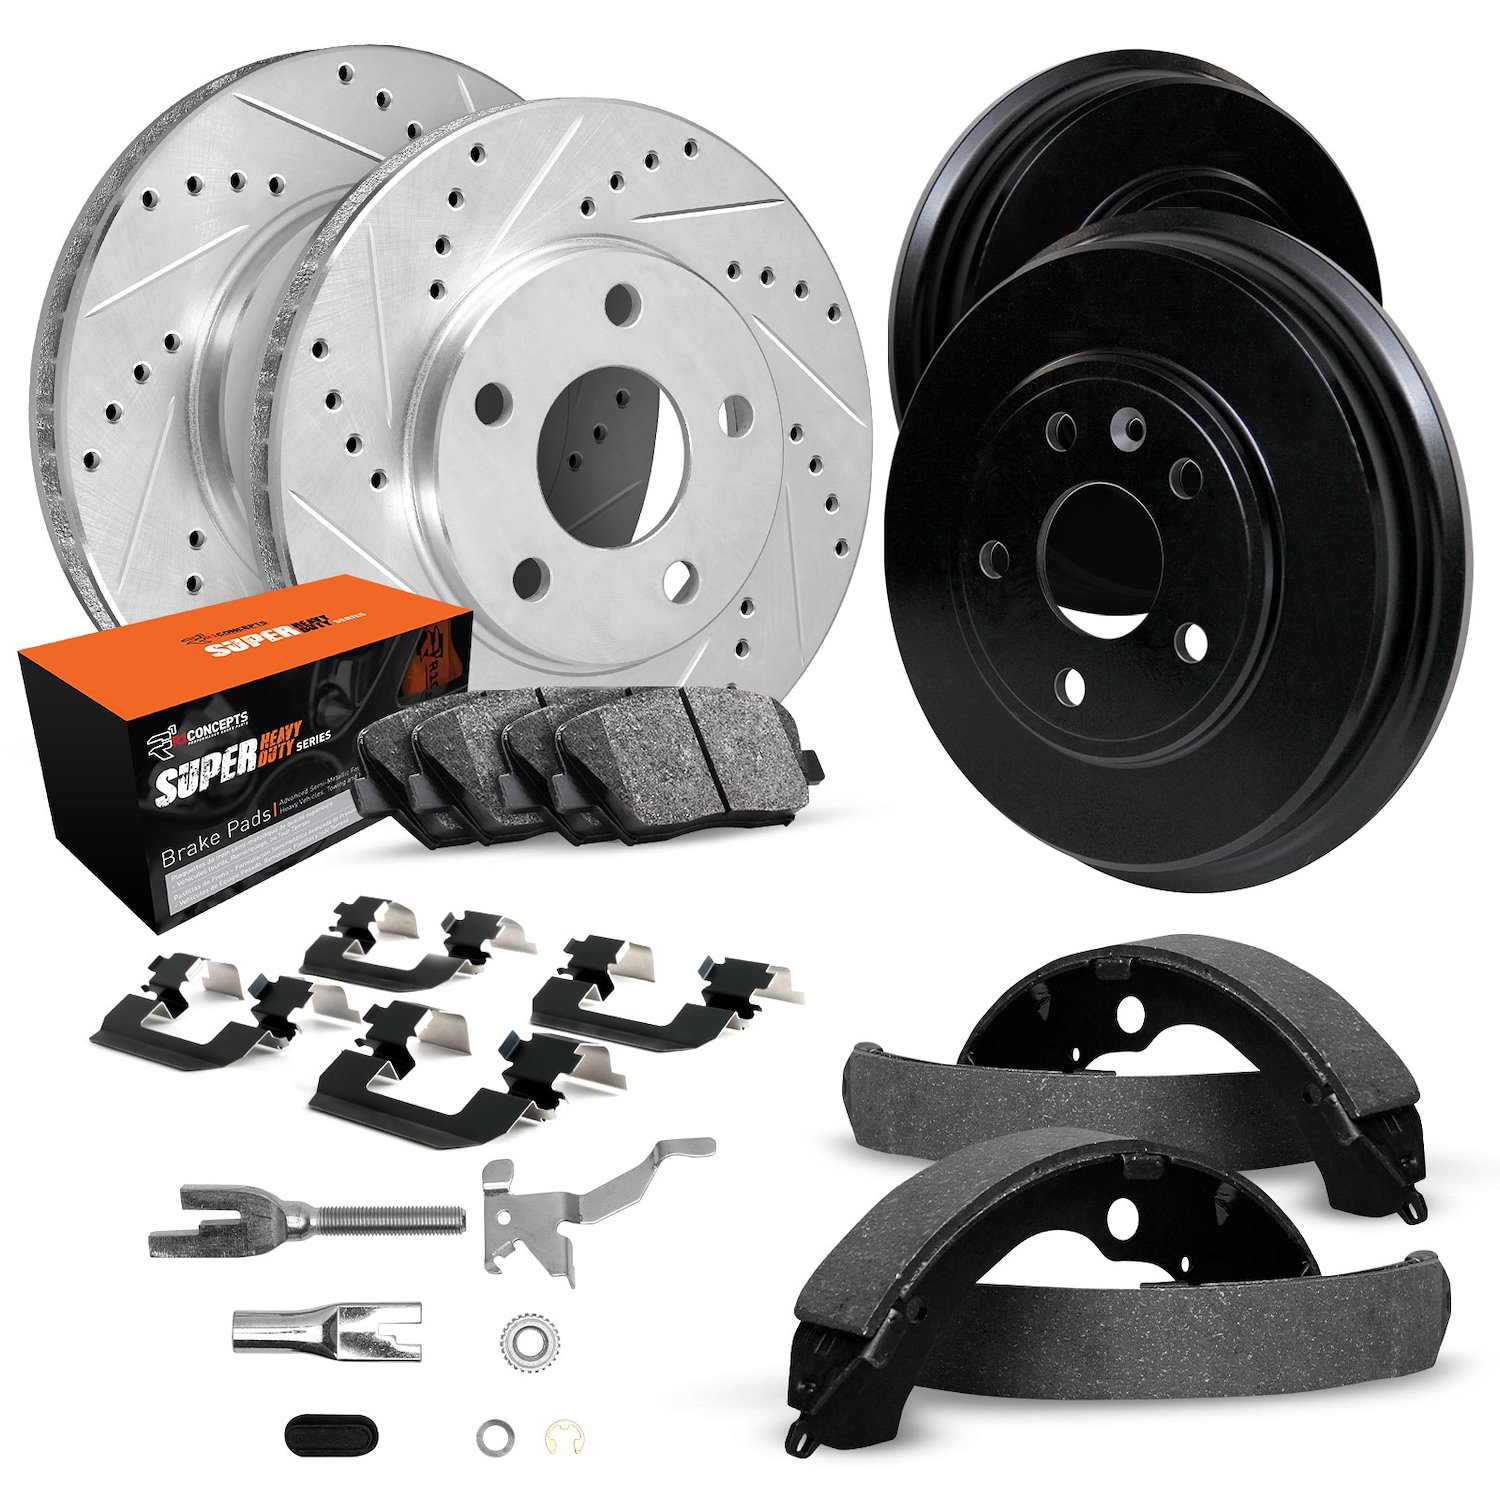 E-Line Drilled/Slotted Silver Rotor & Drum Set w/Super-Duty Pads, Shoes/Hardware/Adjusters, 1985-1993 Mopar